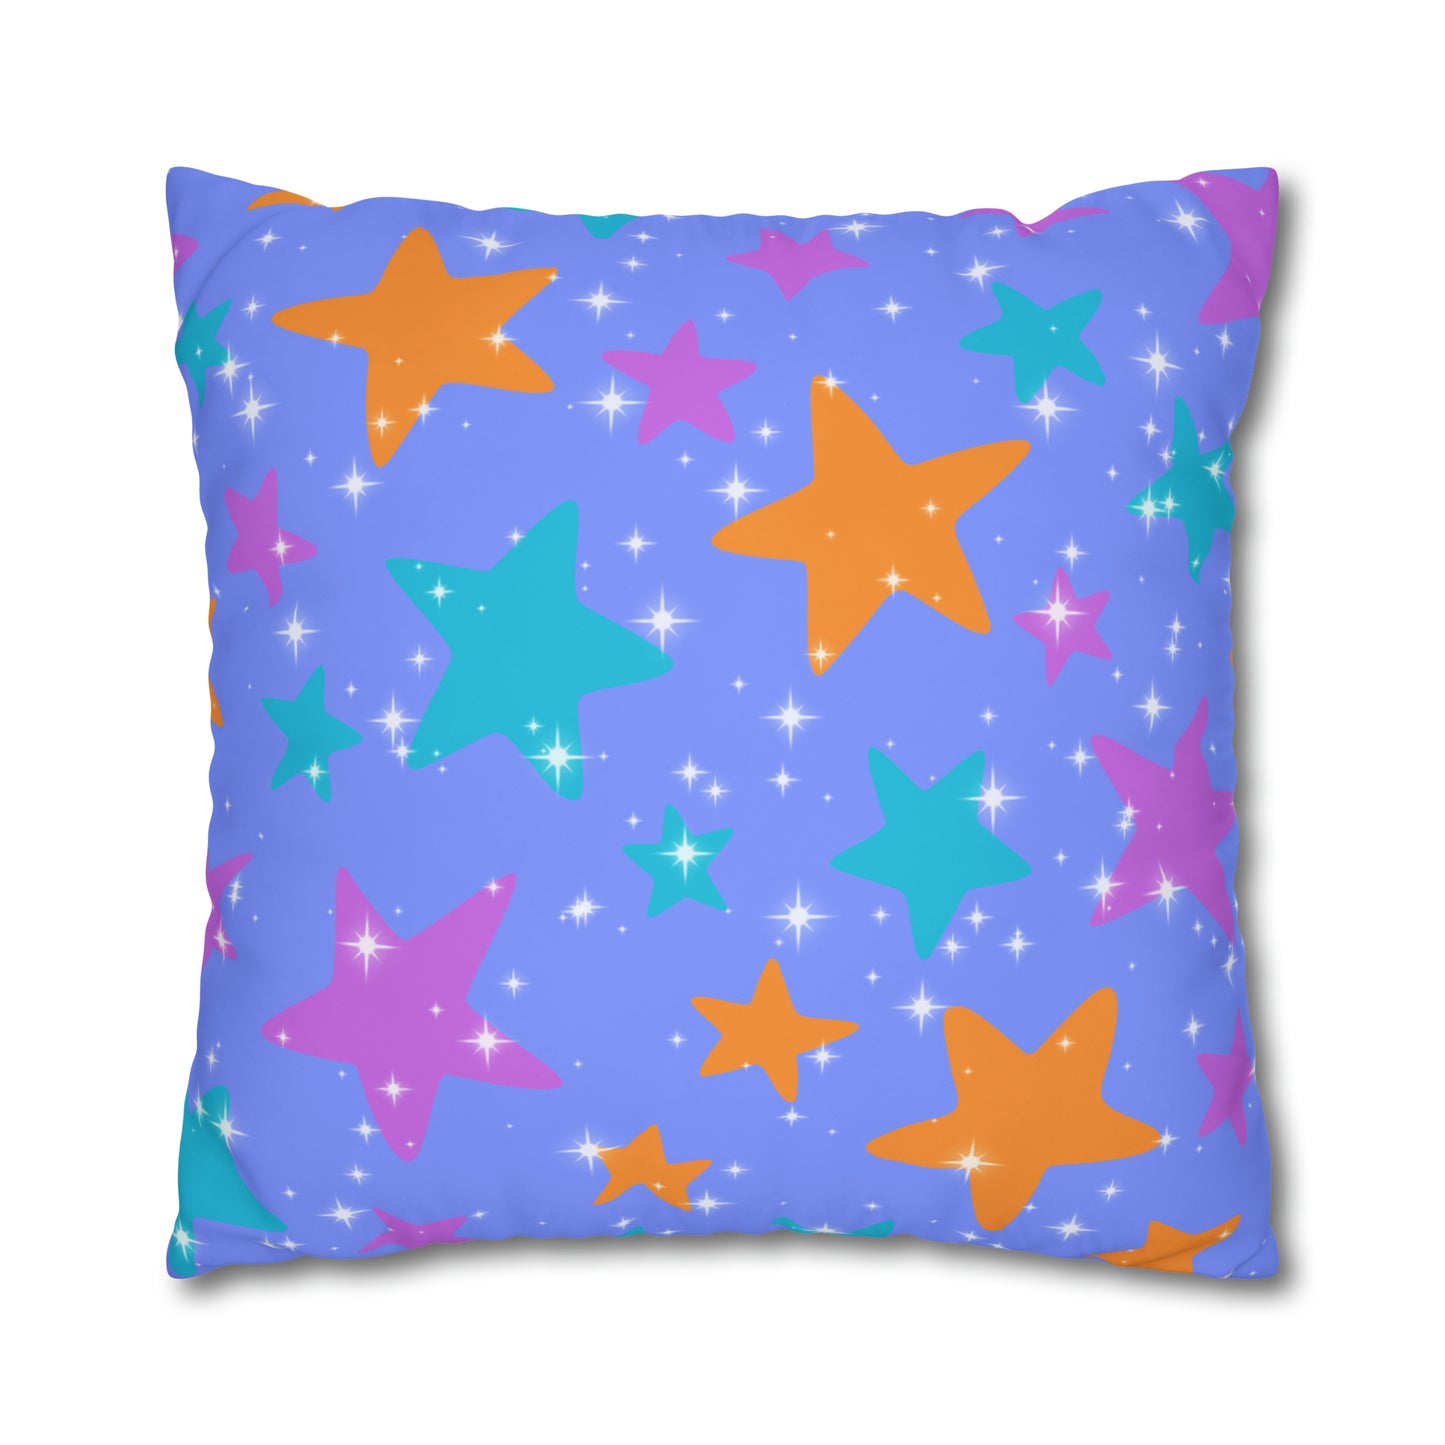 Sam and Rocky Mars Expedition Galaxy Outer Space Astronauts Children's Nursery Playroom Square Poly Canvas Pillow Cover